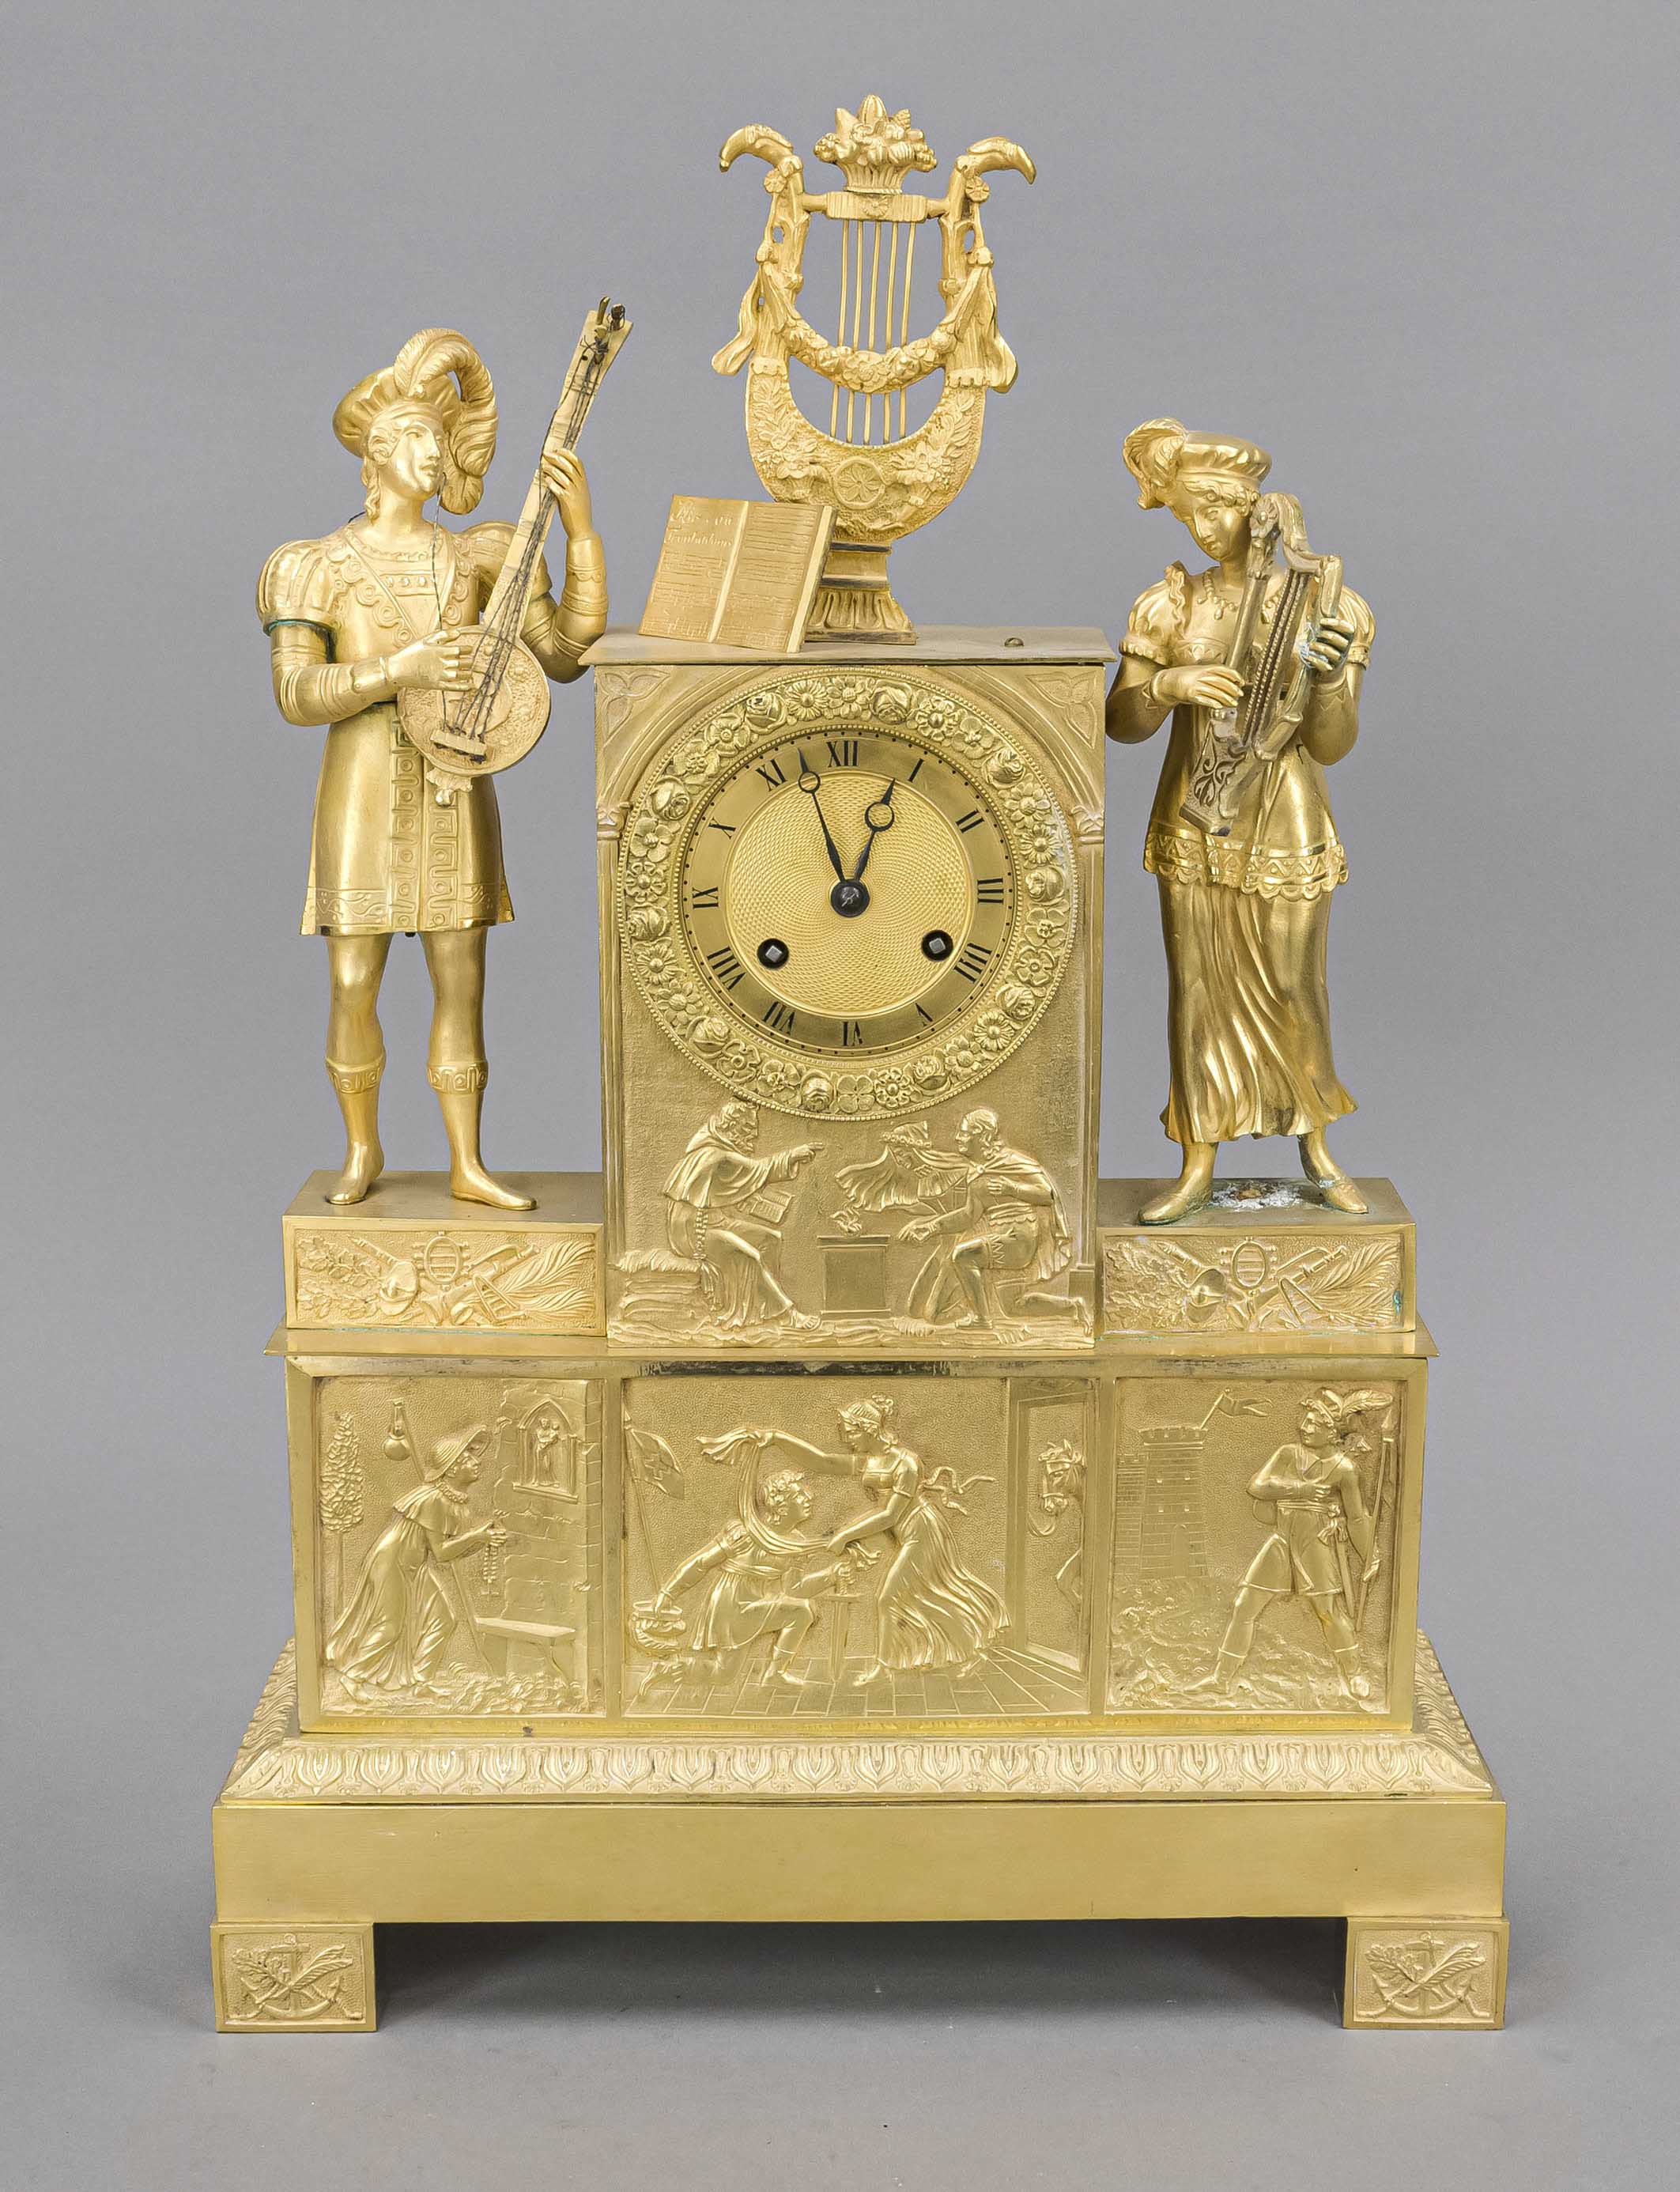 French Empire mantel clock, 1st half 19th century, gilt bronze, polished and satin-finished,